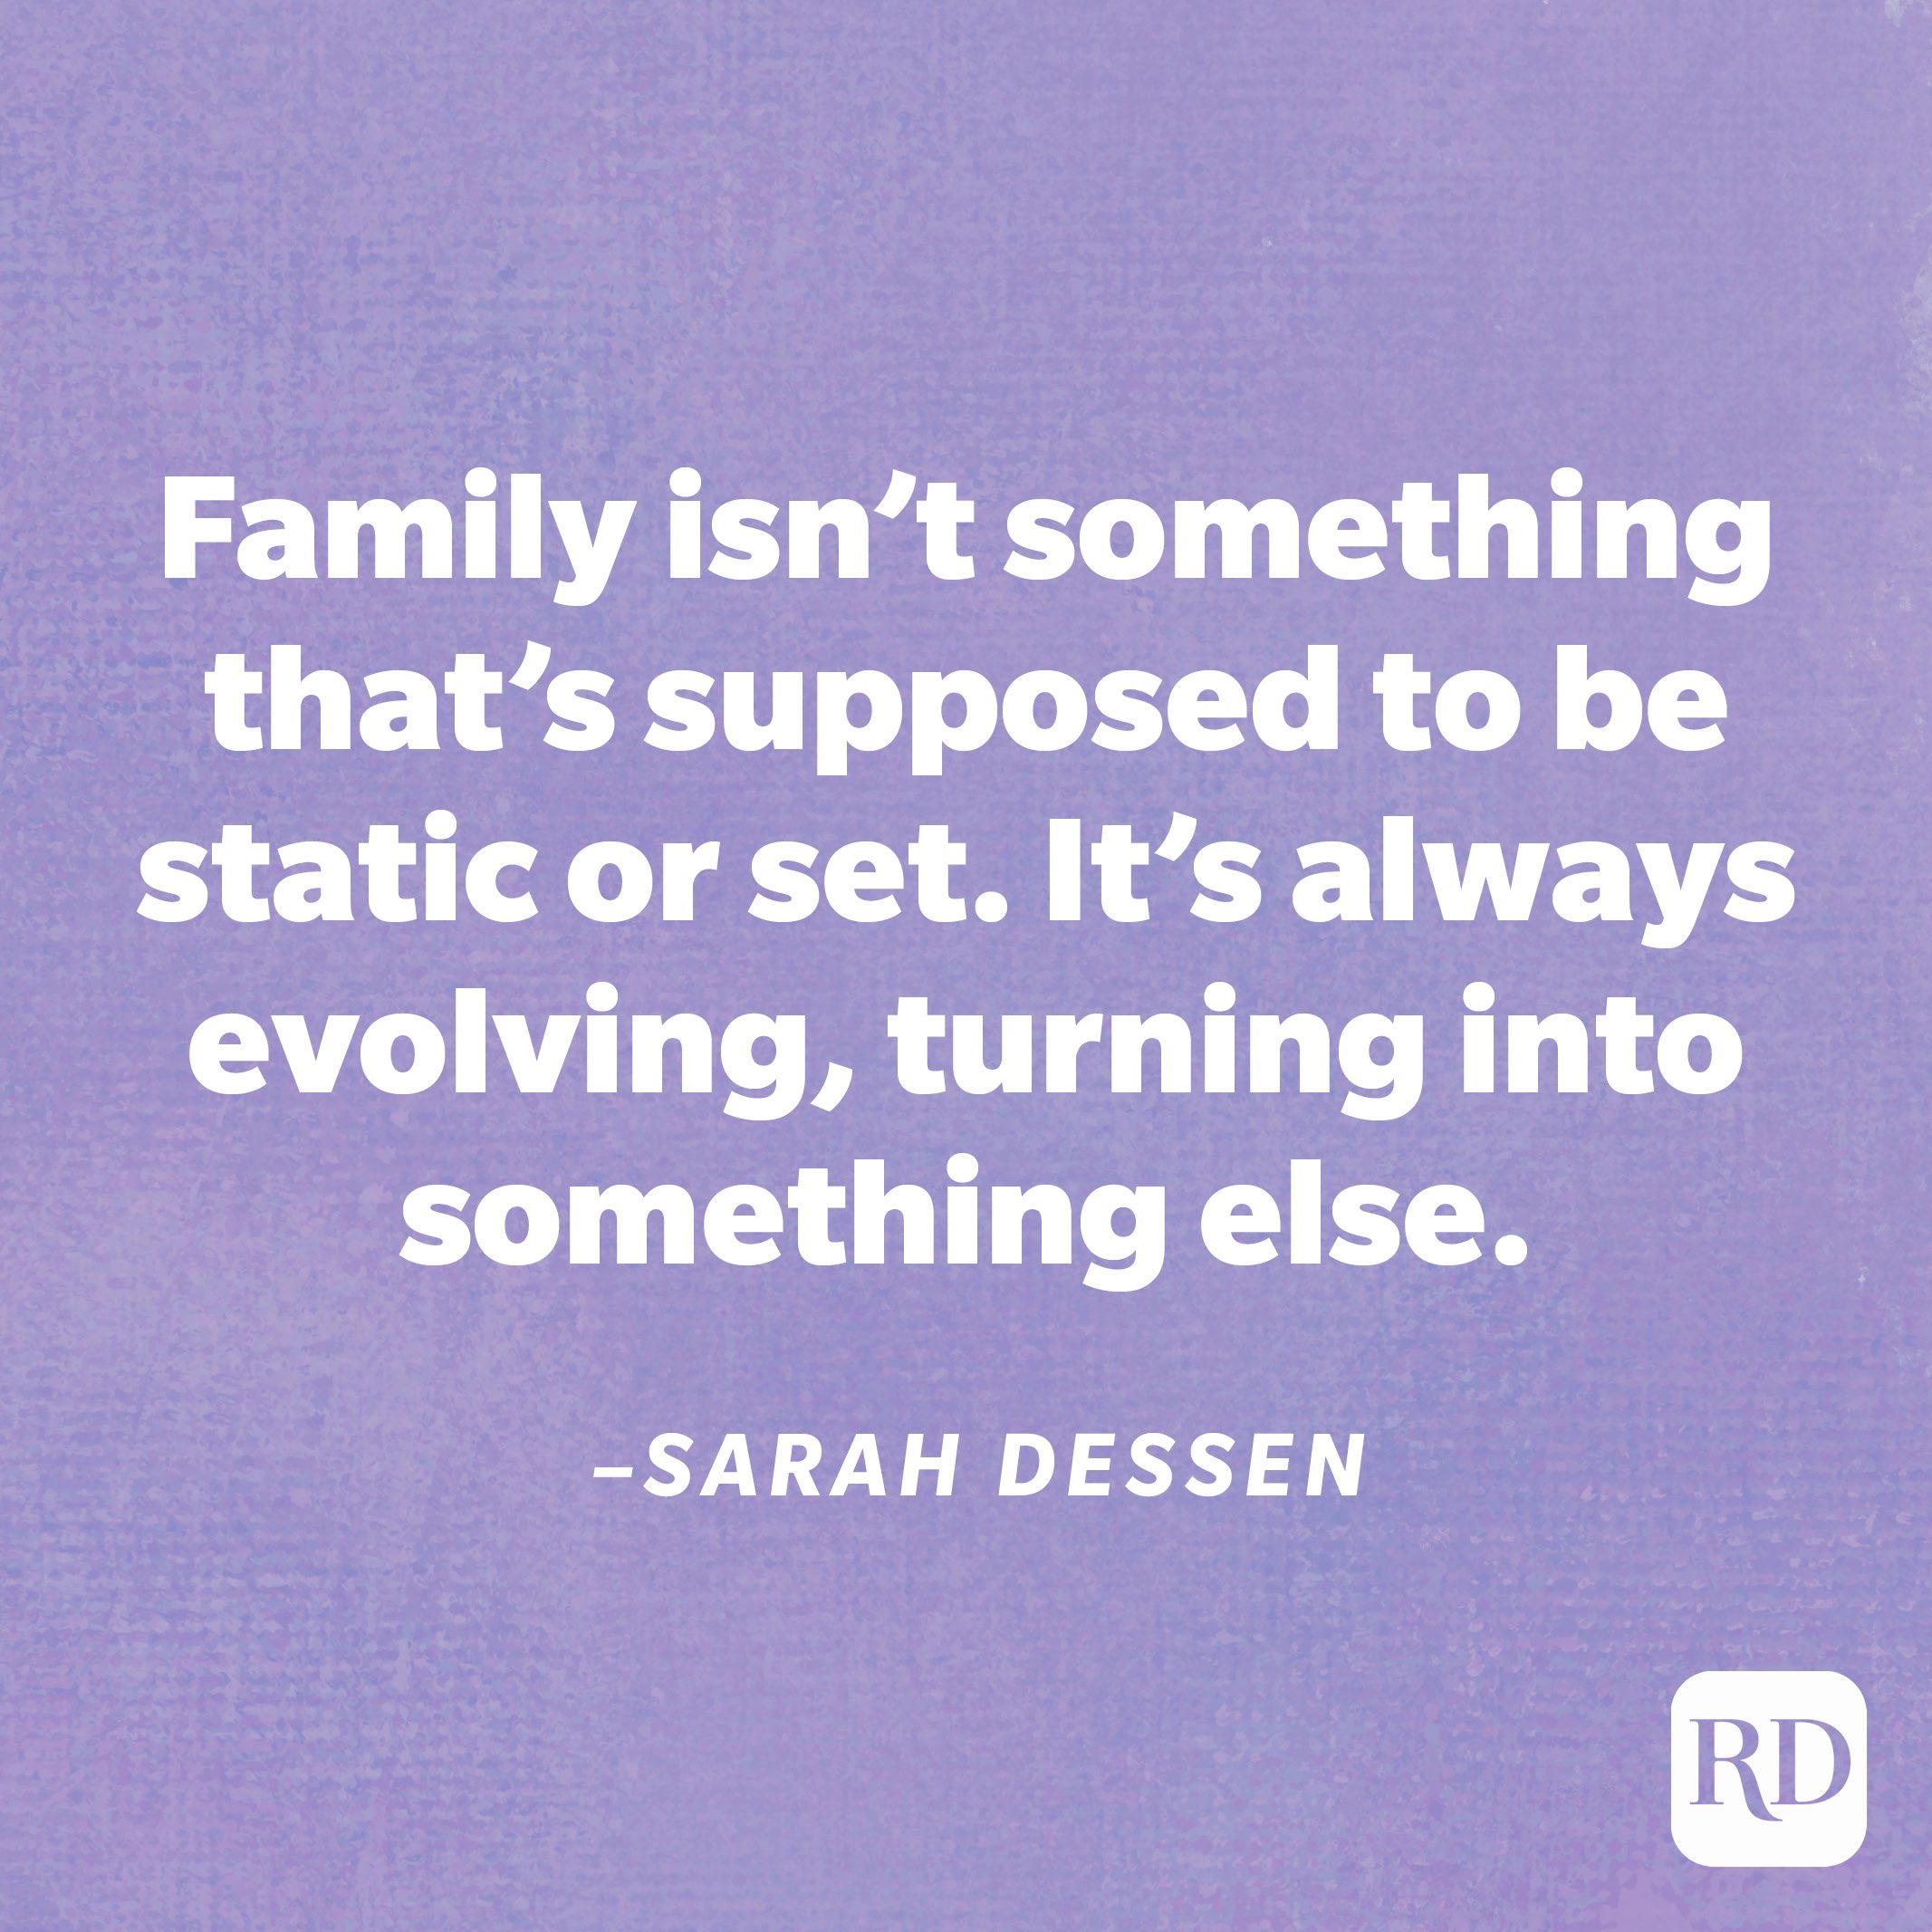 “Family isn’t something that’s supposed to be static or set. It’s always evolving, turning into something else.”—Sarah Dessen